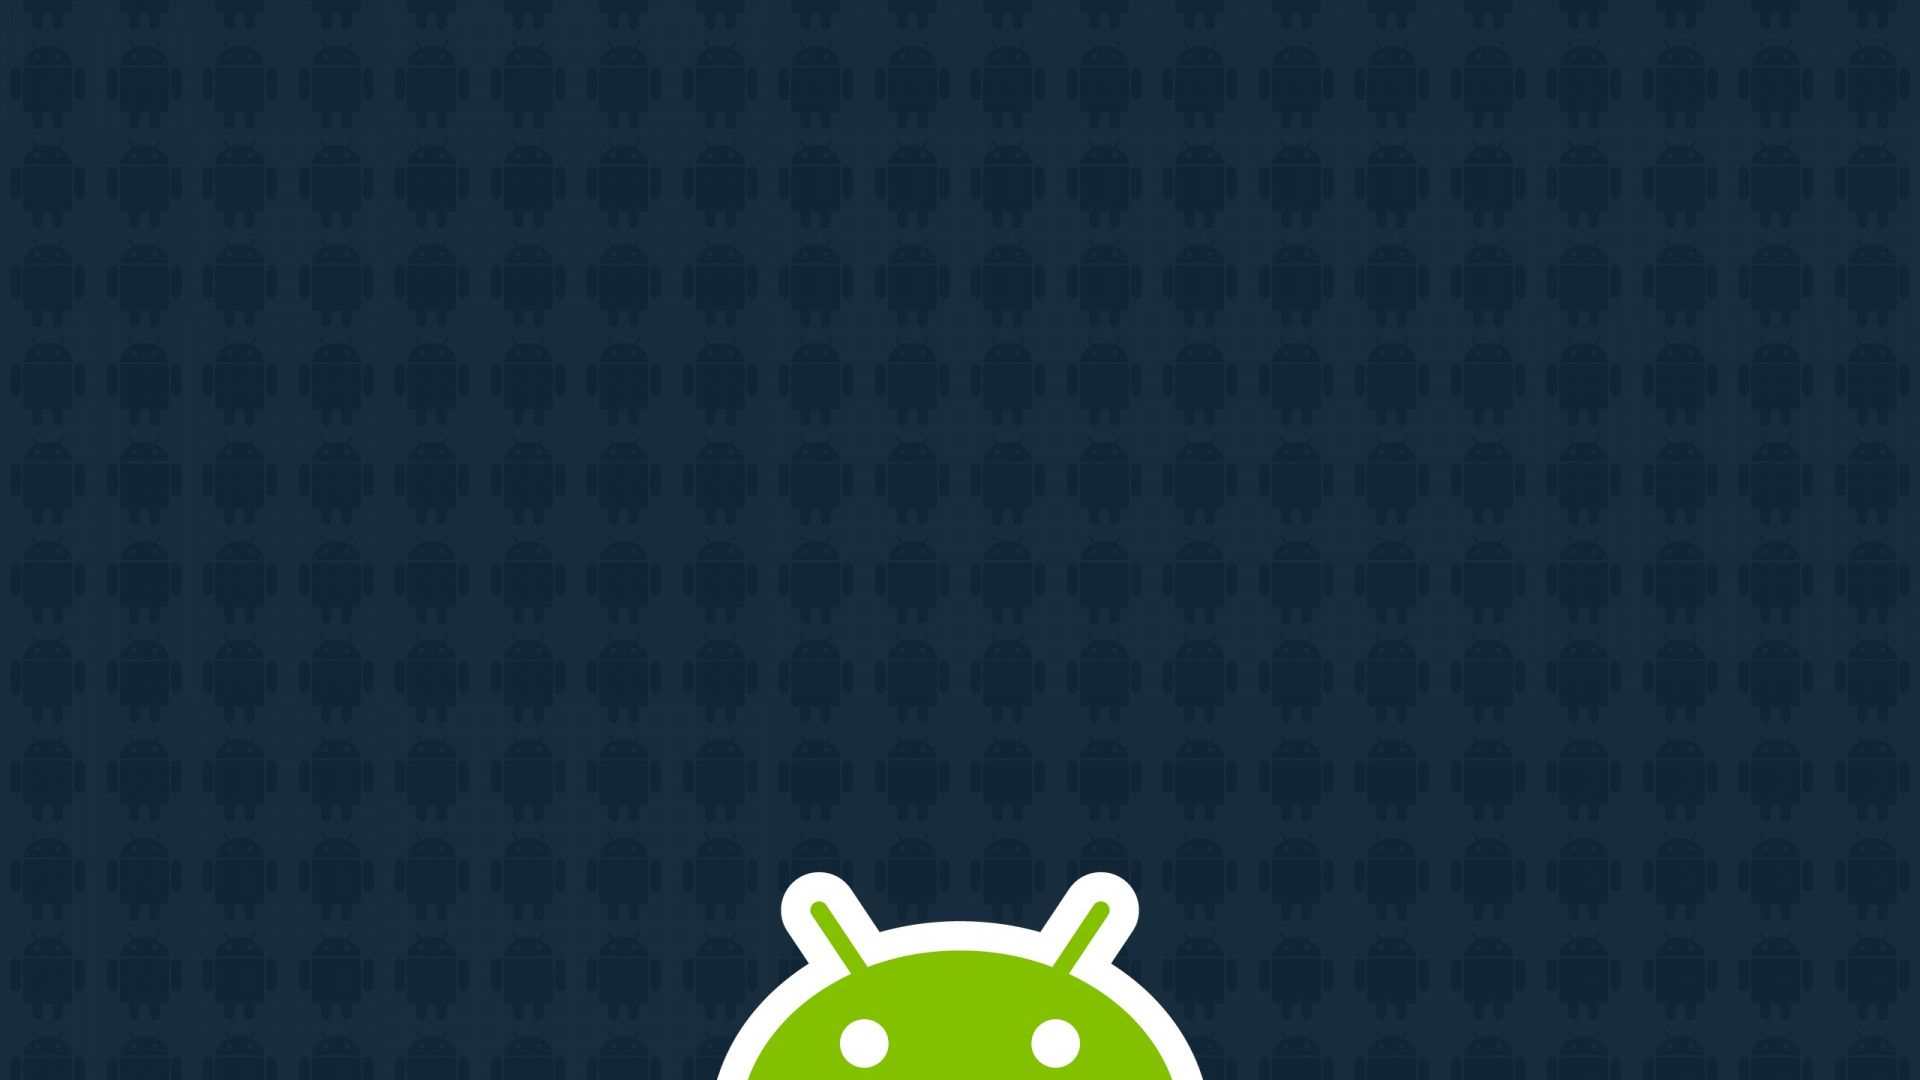 Wallpaper For Android